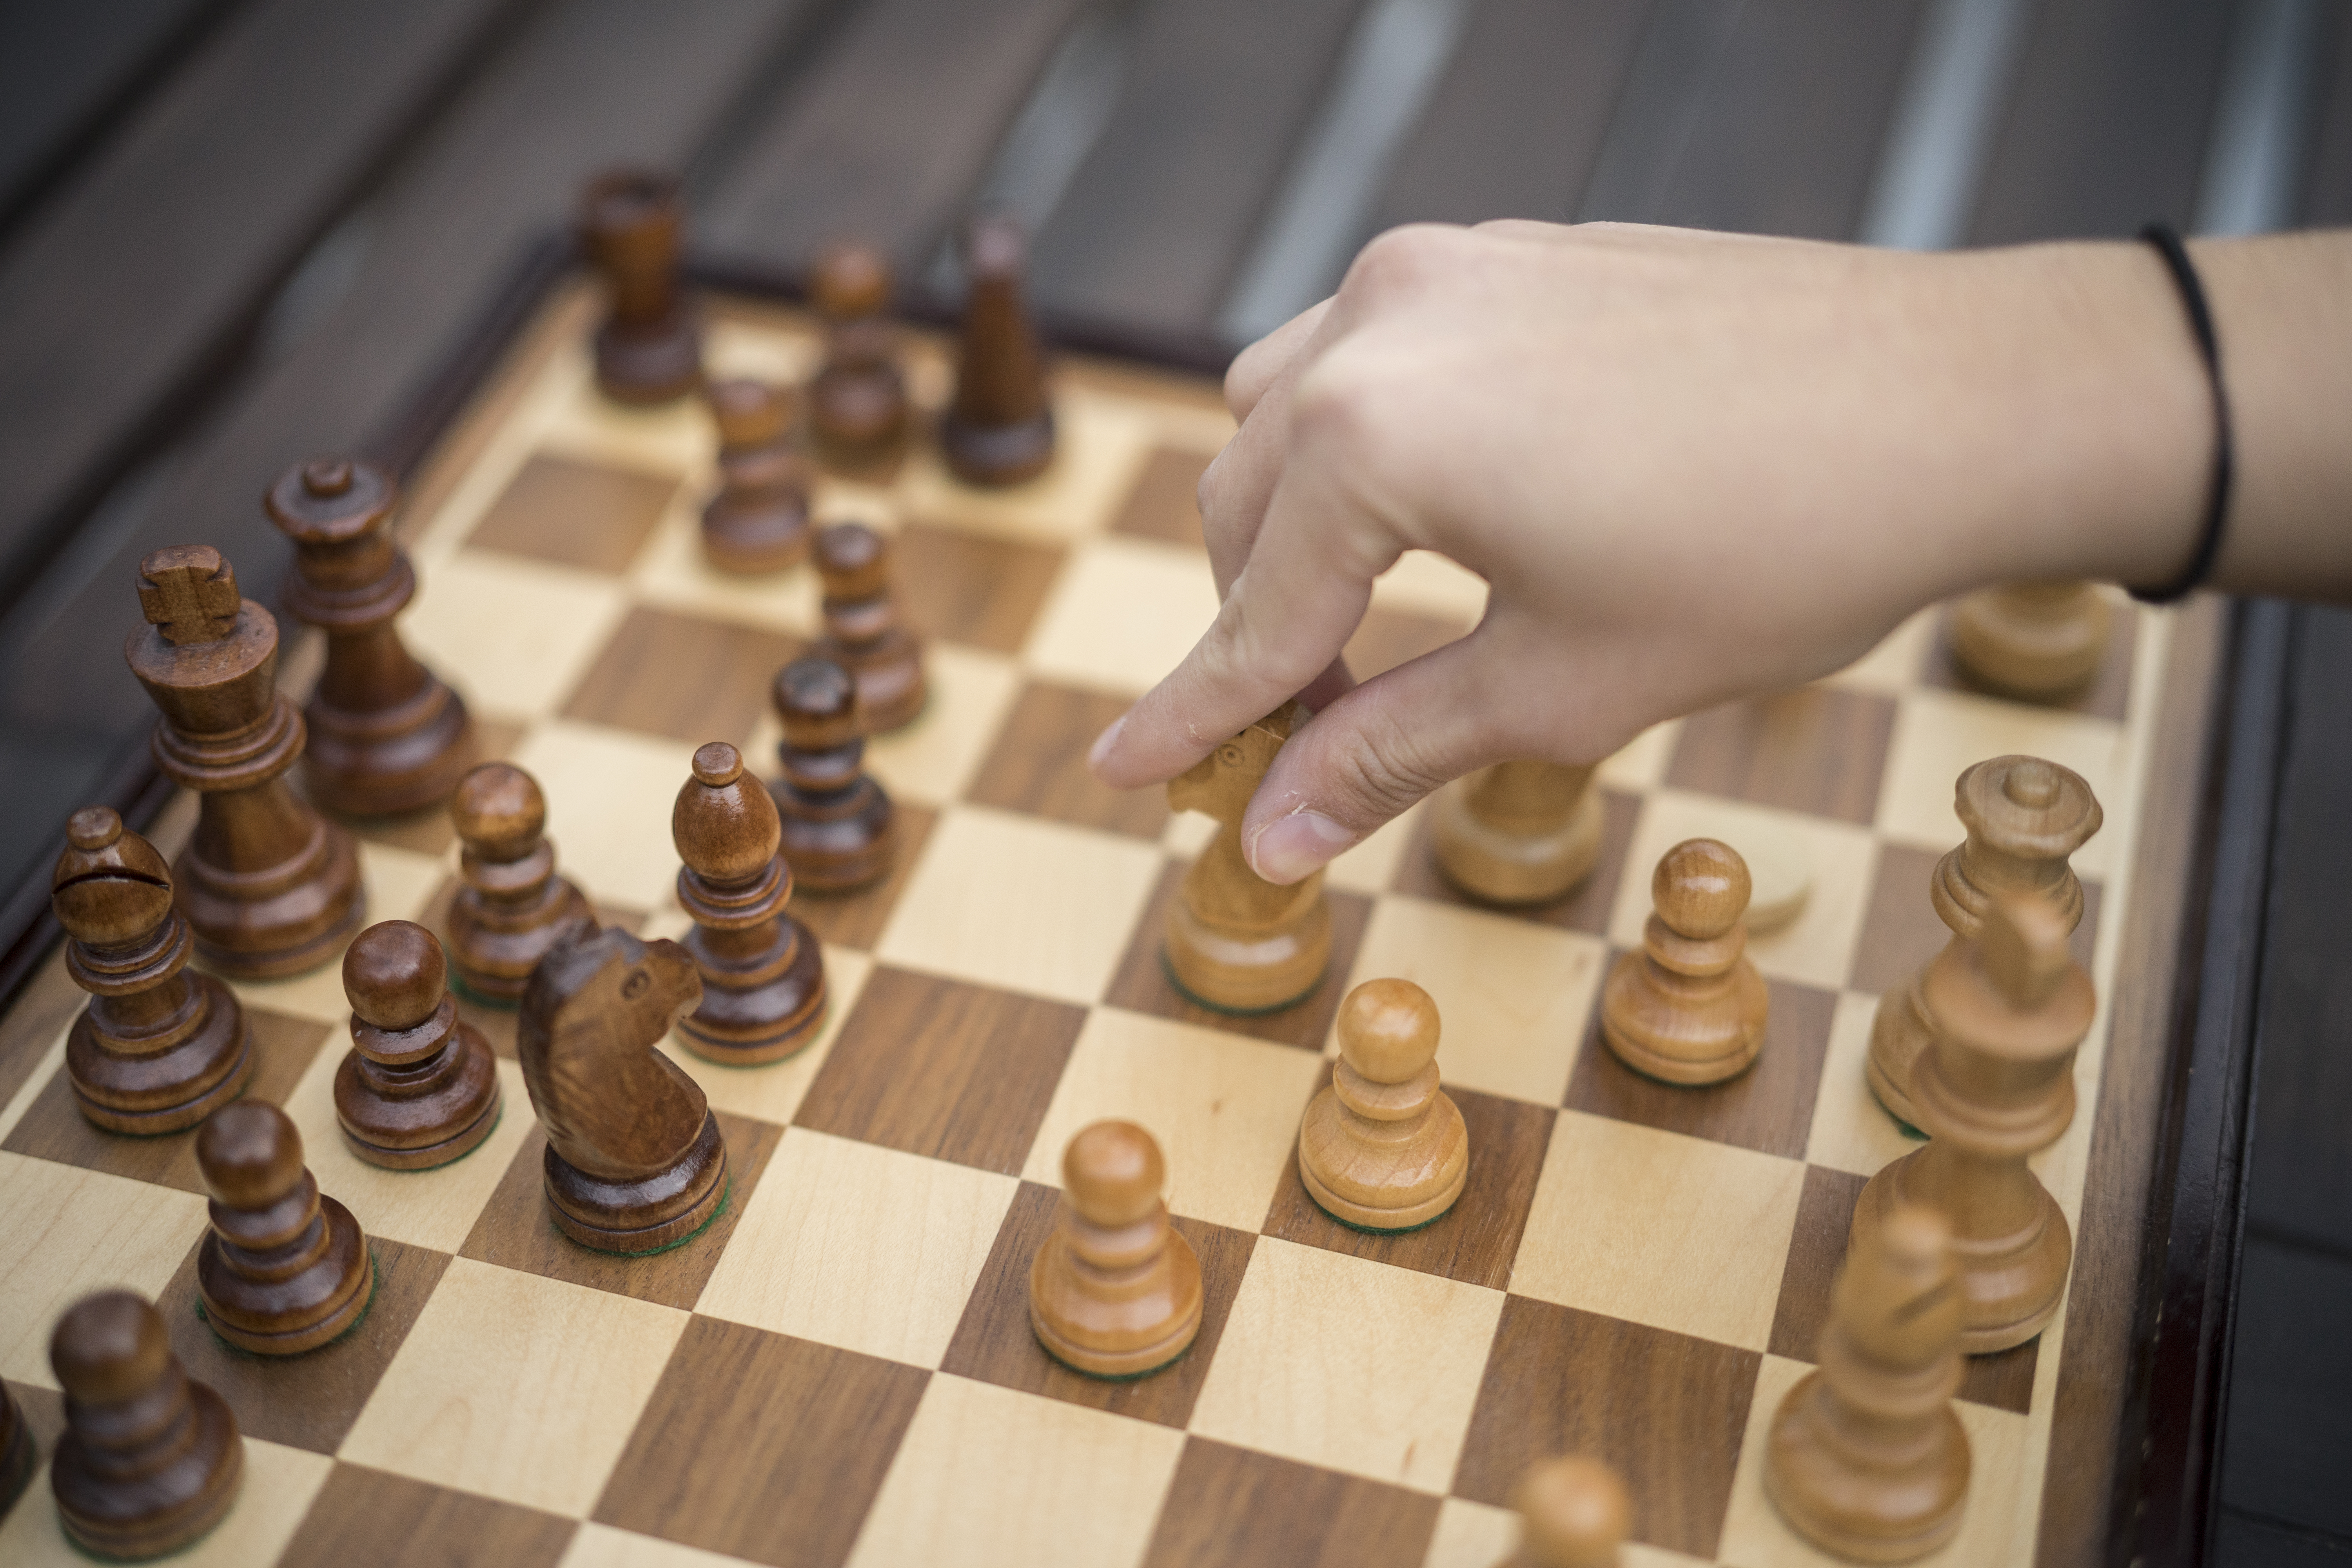 The Queen's Gambit' brings allure to the game of chess